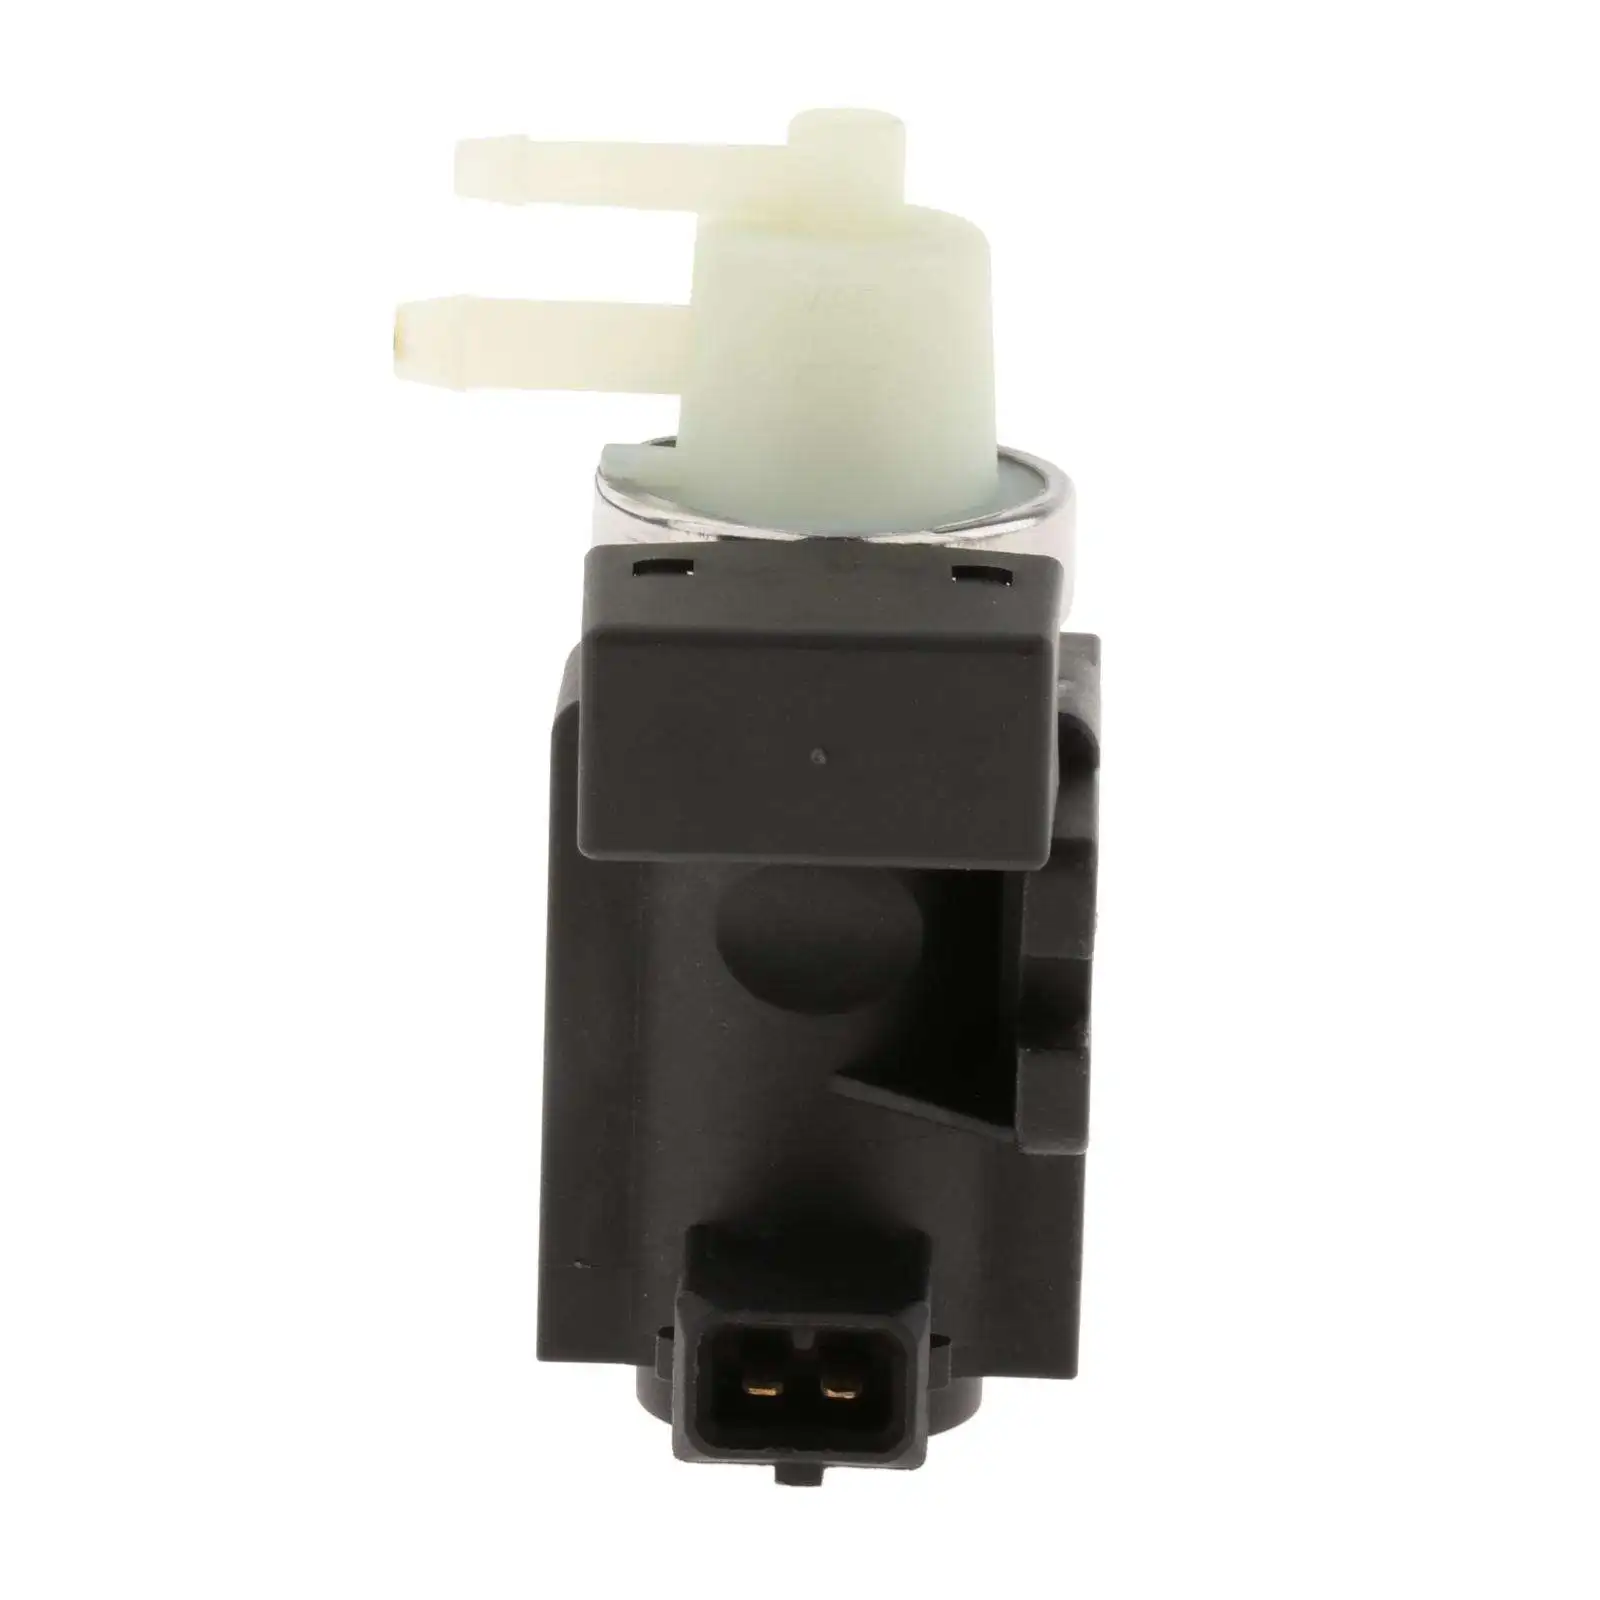 Turbo Wastegate Solenoid Valve 5851073 55573362 55563534 Replacement Fit for Vauxhall J Zafira C